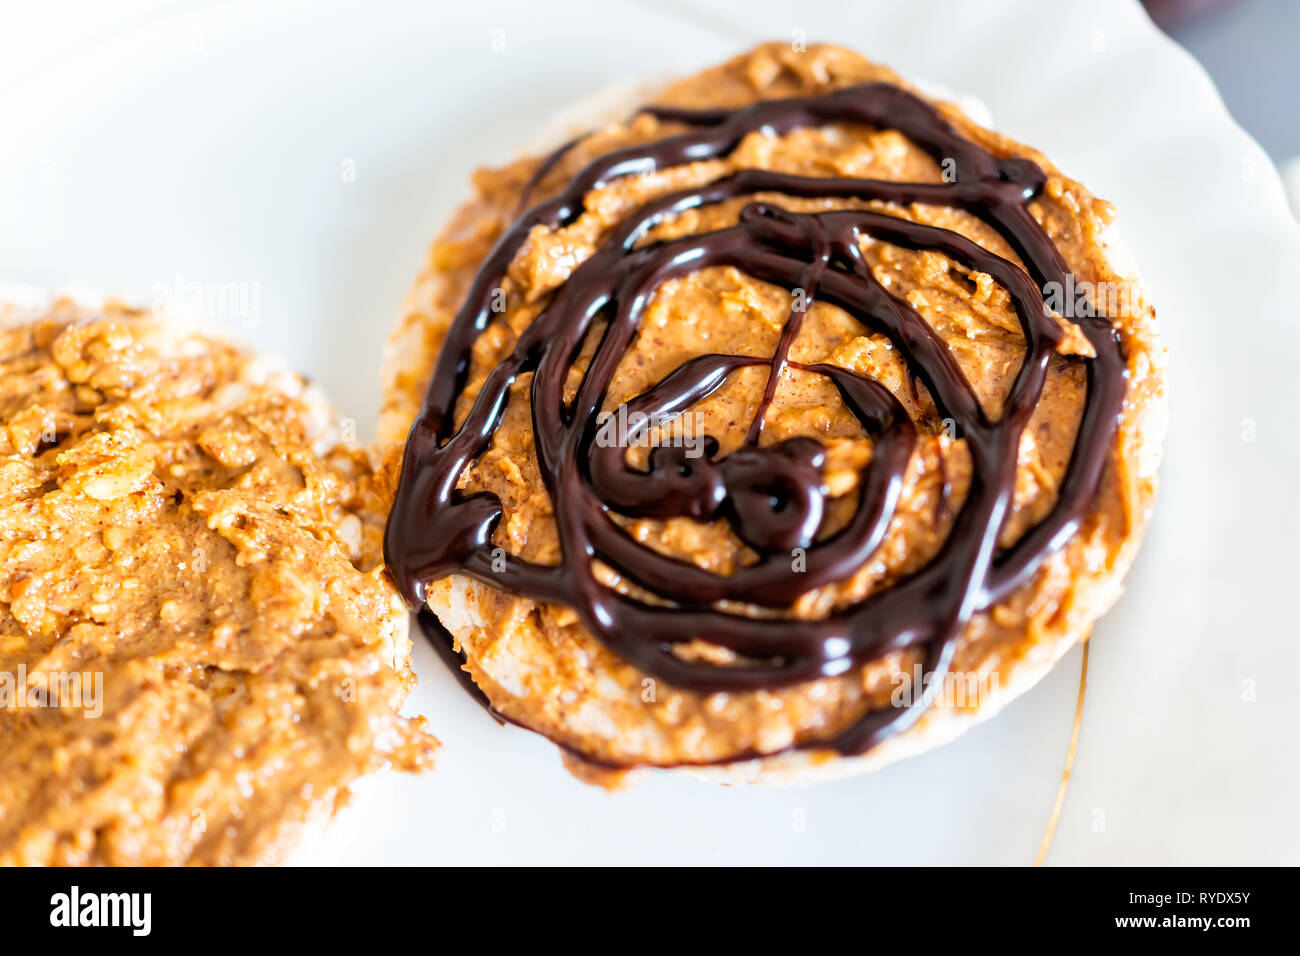 Flat top closeup of rice cake with chocolate drizzle sauce or syrup vegan vegetarian snack dessert one single piece on white plate and peanut butter Stock Photo